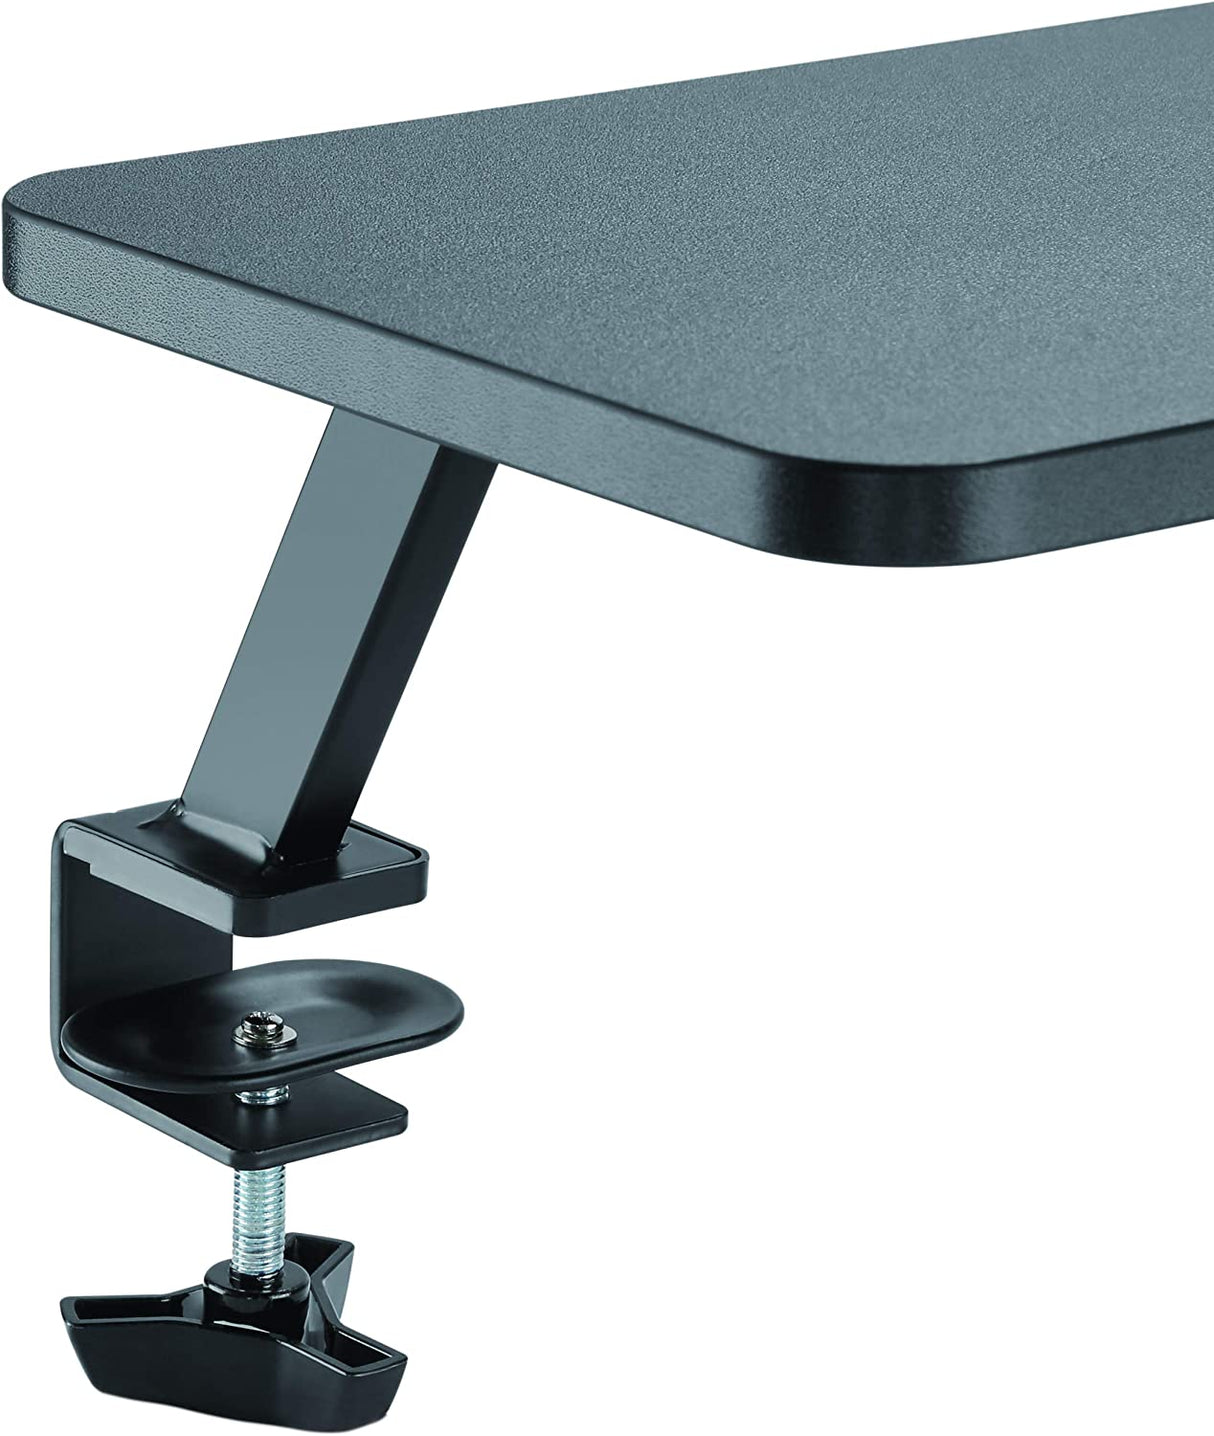 StarTech.com Monitor Riser Stand - Clamp-on Monitor Shelf for Desk - Extra Wide 25.6" (65 cm) for up to 34" Monitors - Black (MNRISERCLMP)